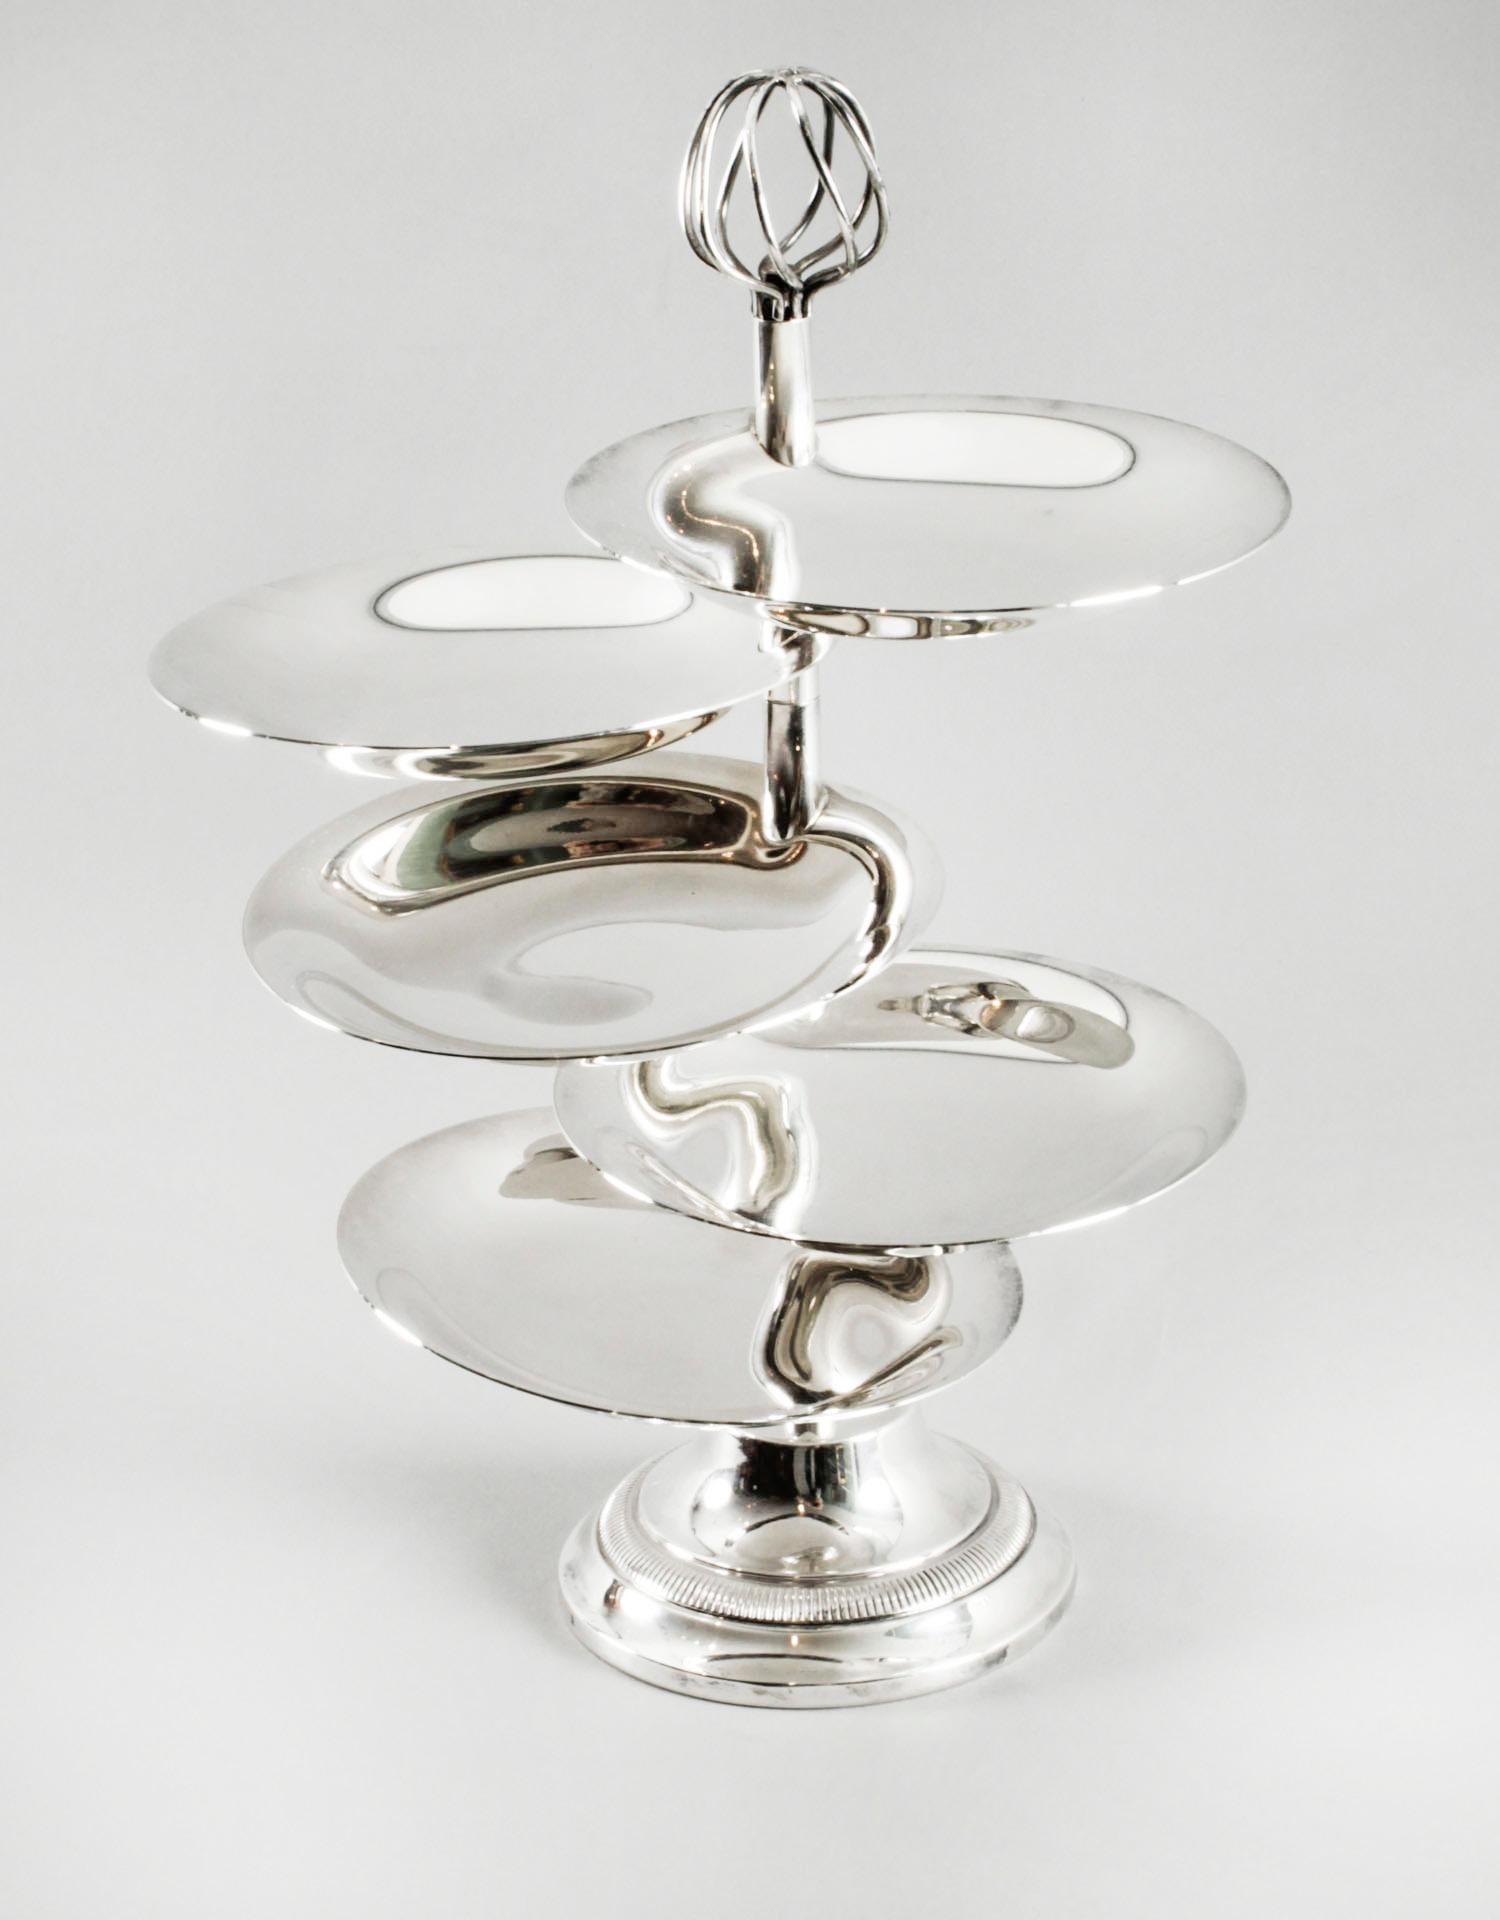 Antique Silver Plated Hors d'oeuvres Stand by Christofle 19th C. en vente 6